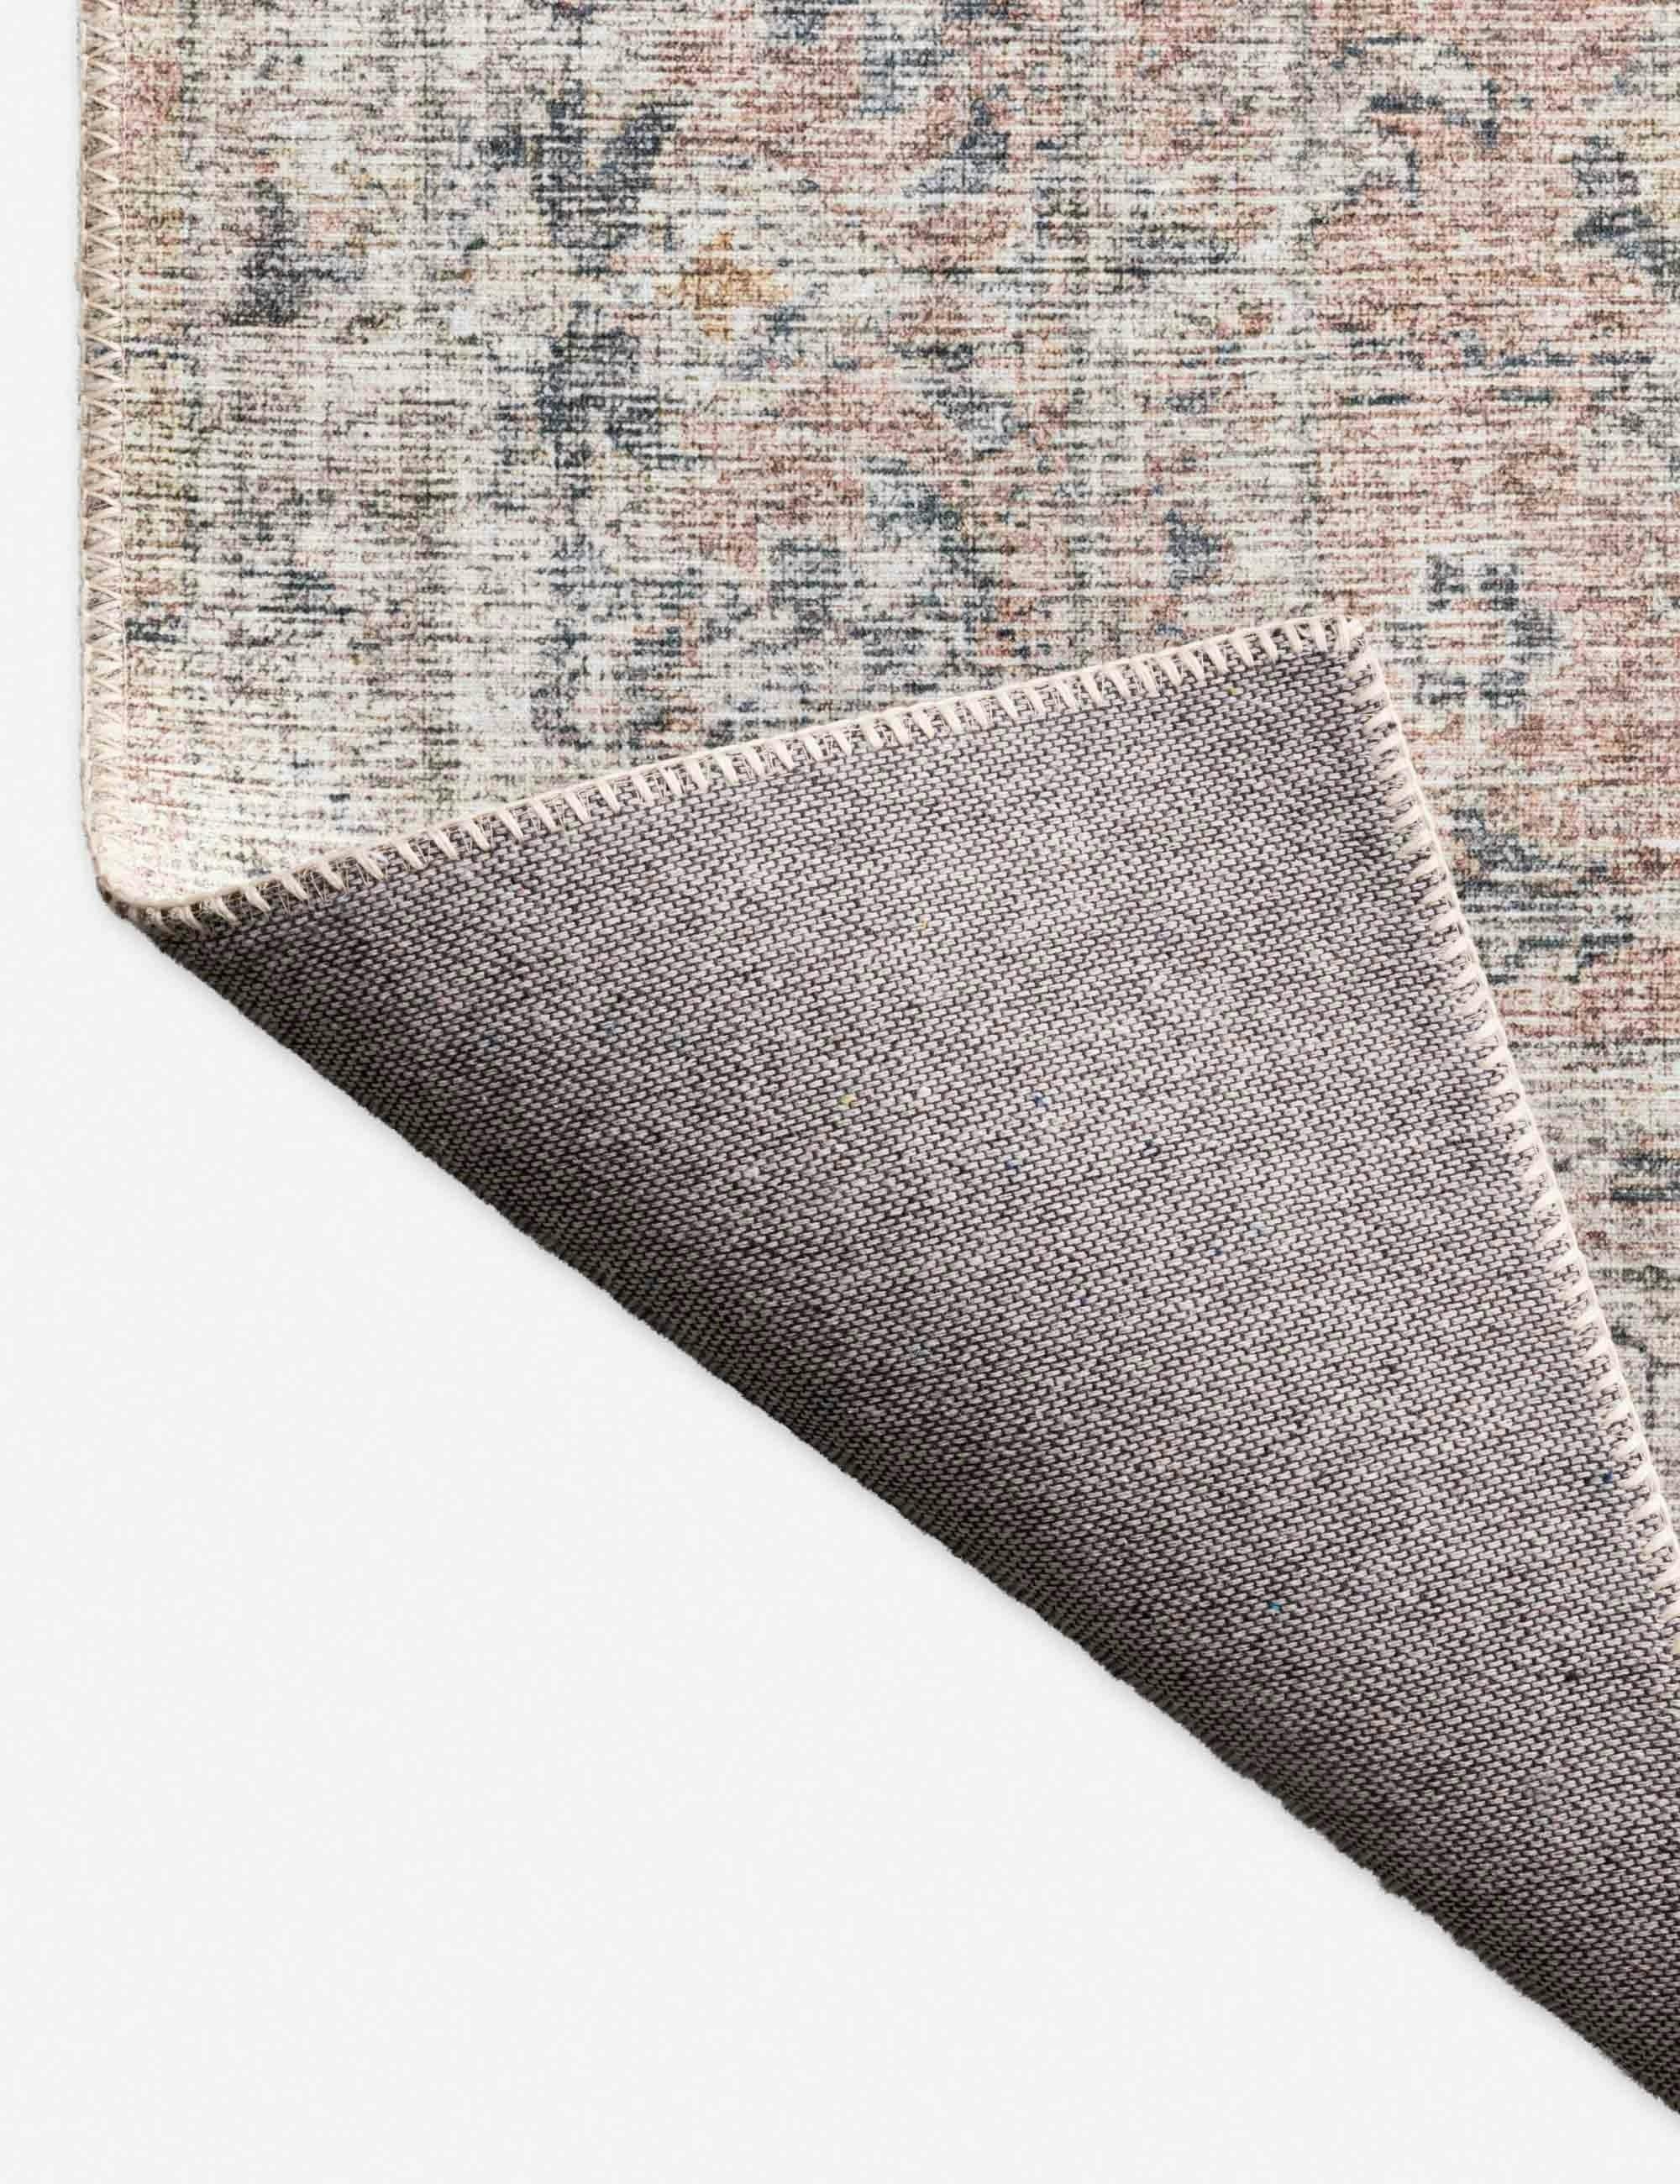 Elysian Blush and Grey 4' x 6' Wool-Synthetic Blend Area Rug